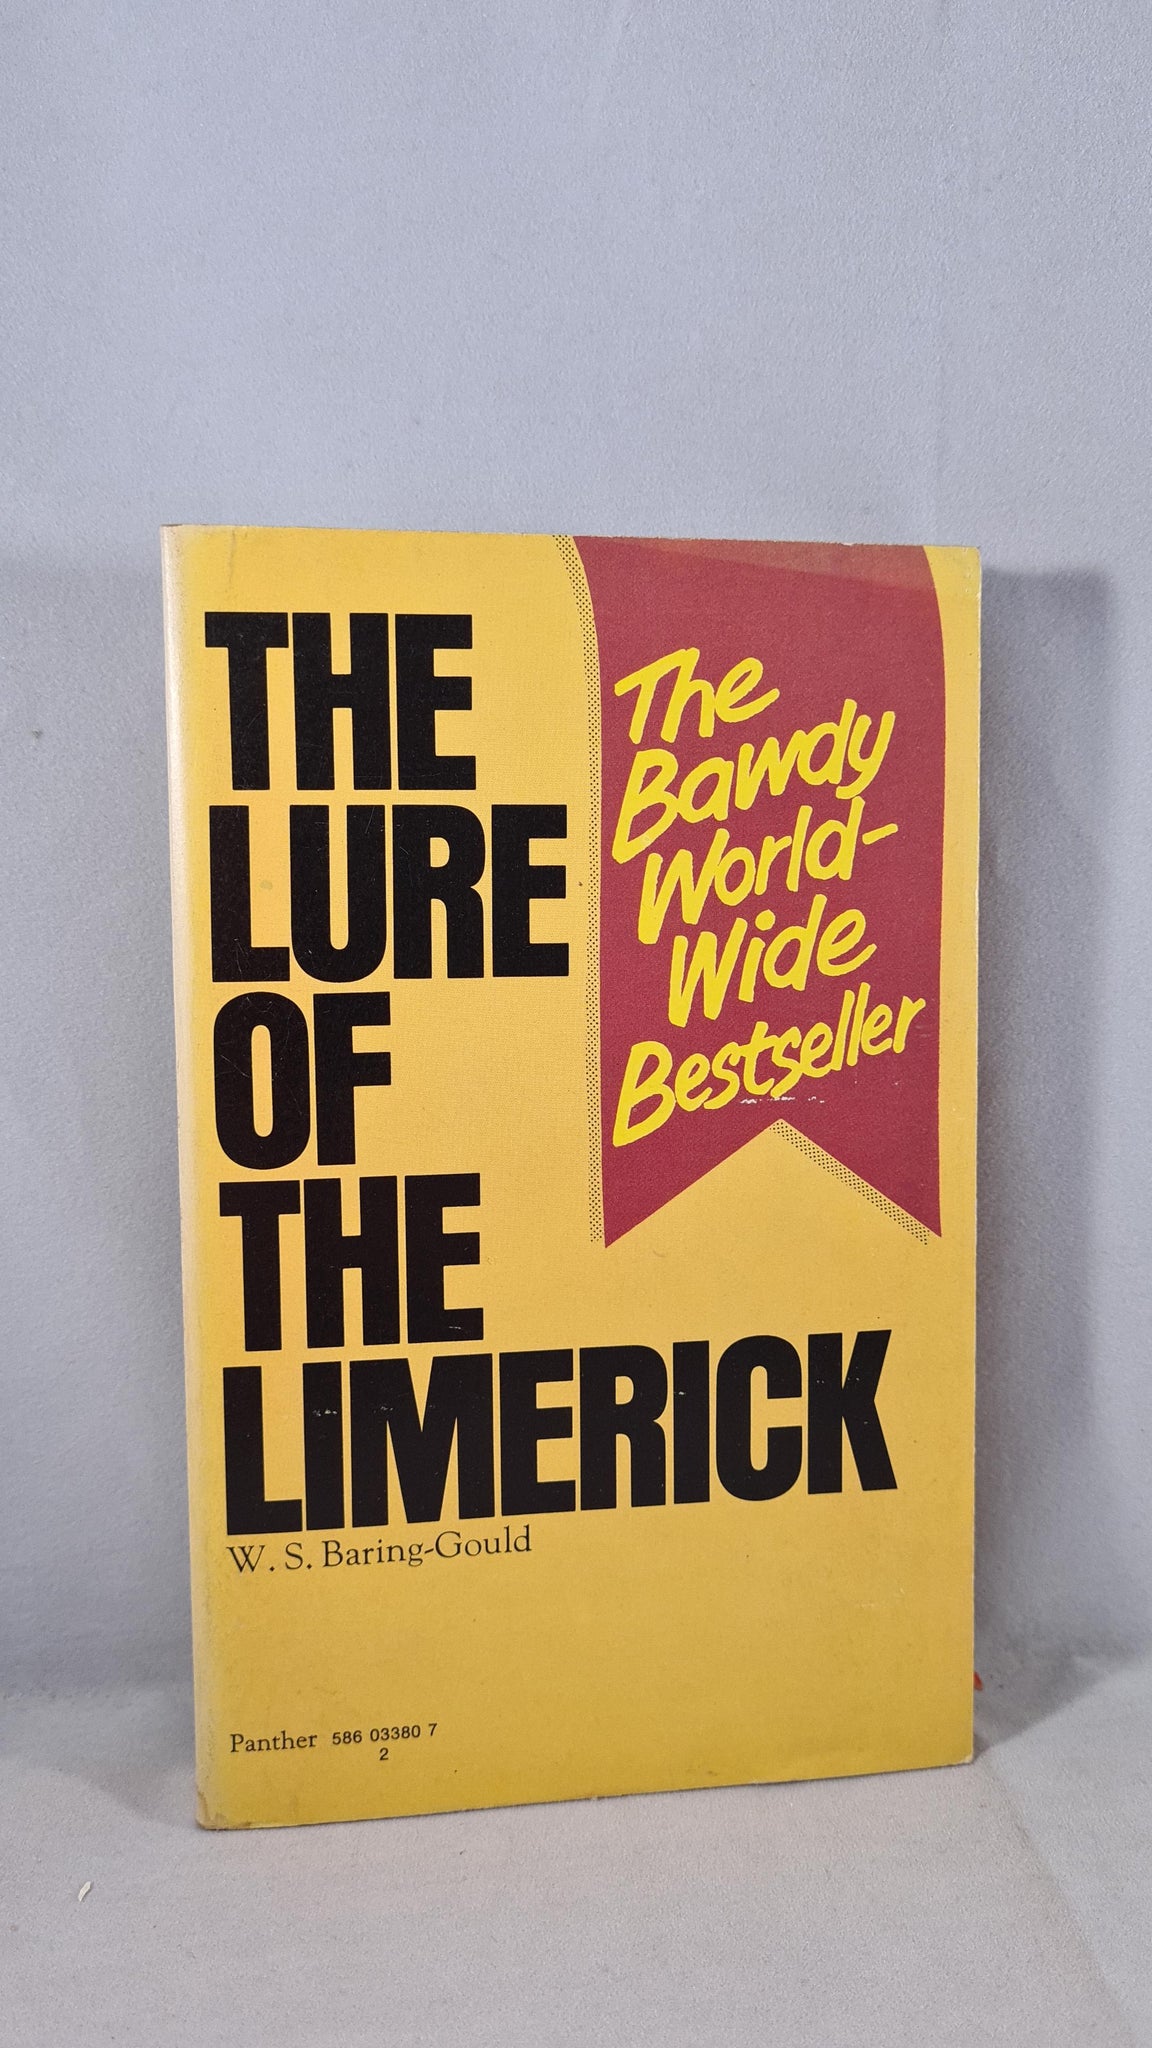 W S Baring-Gould - The Lure of the Limerick, Panther, 1971